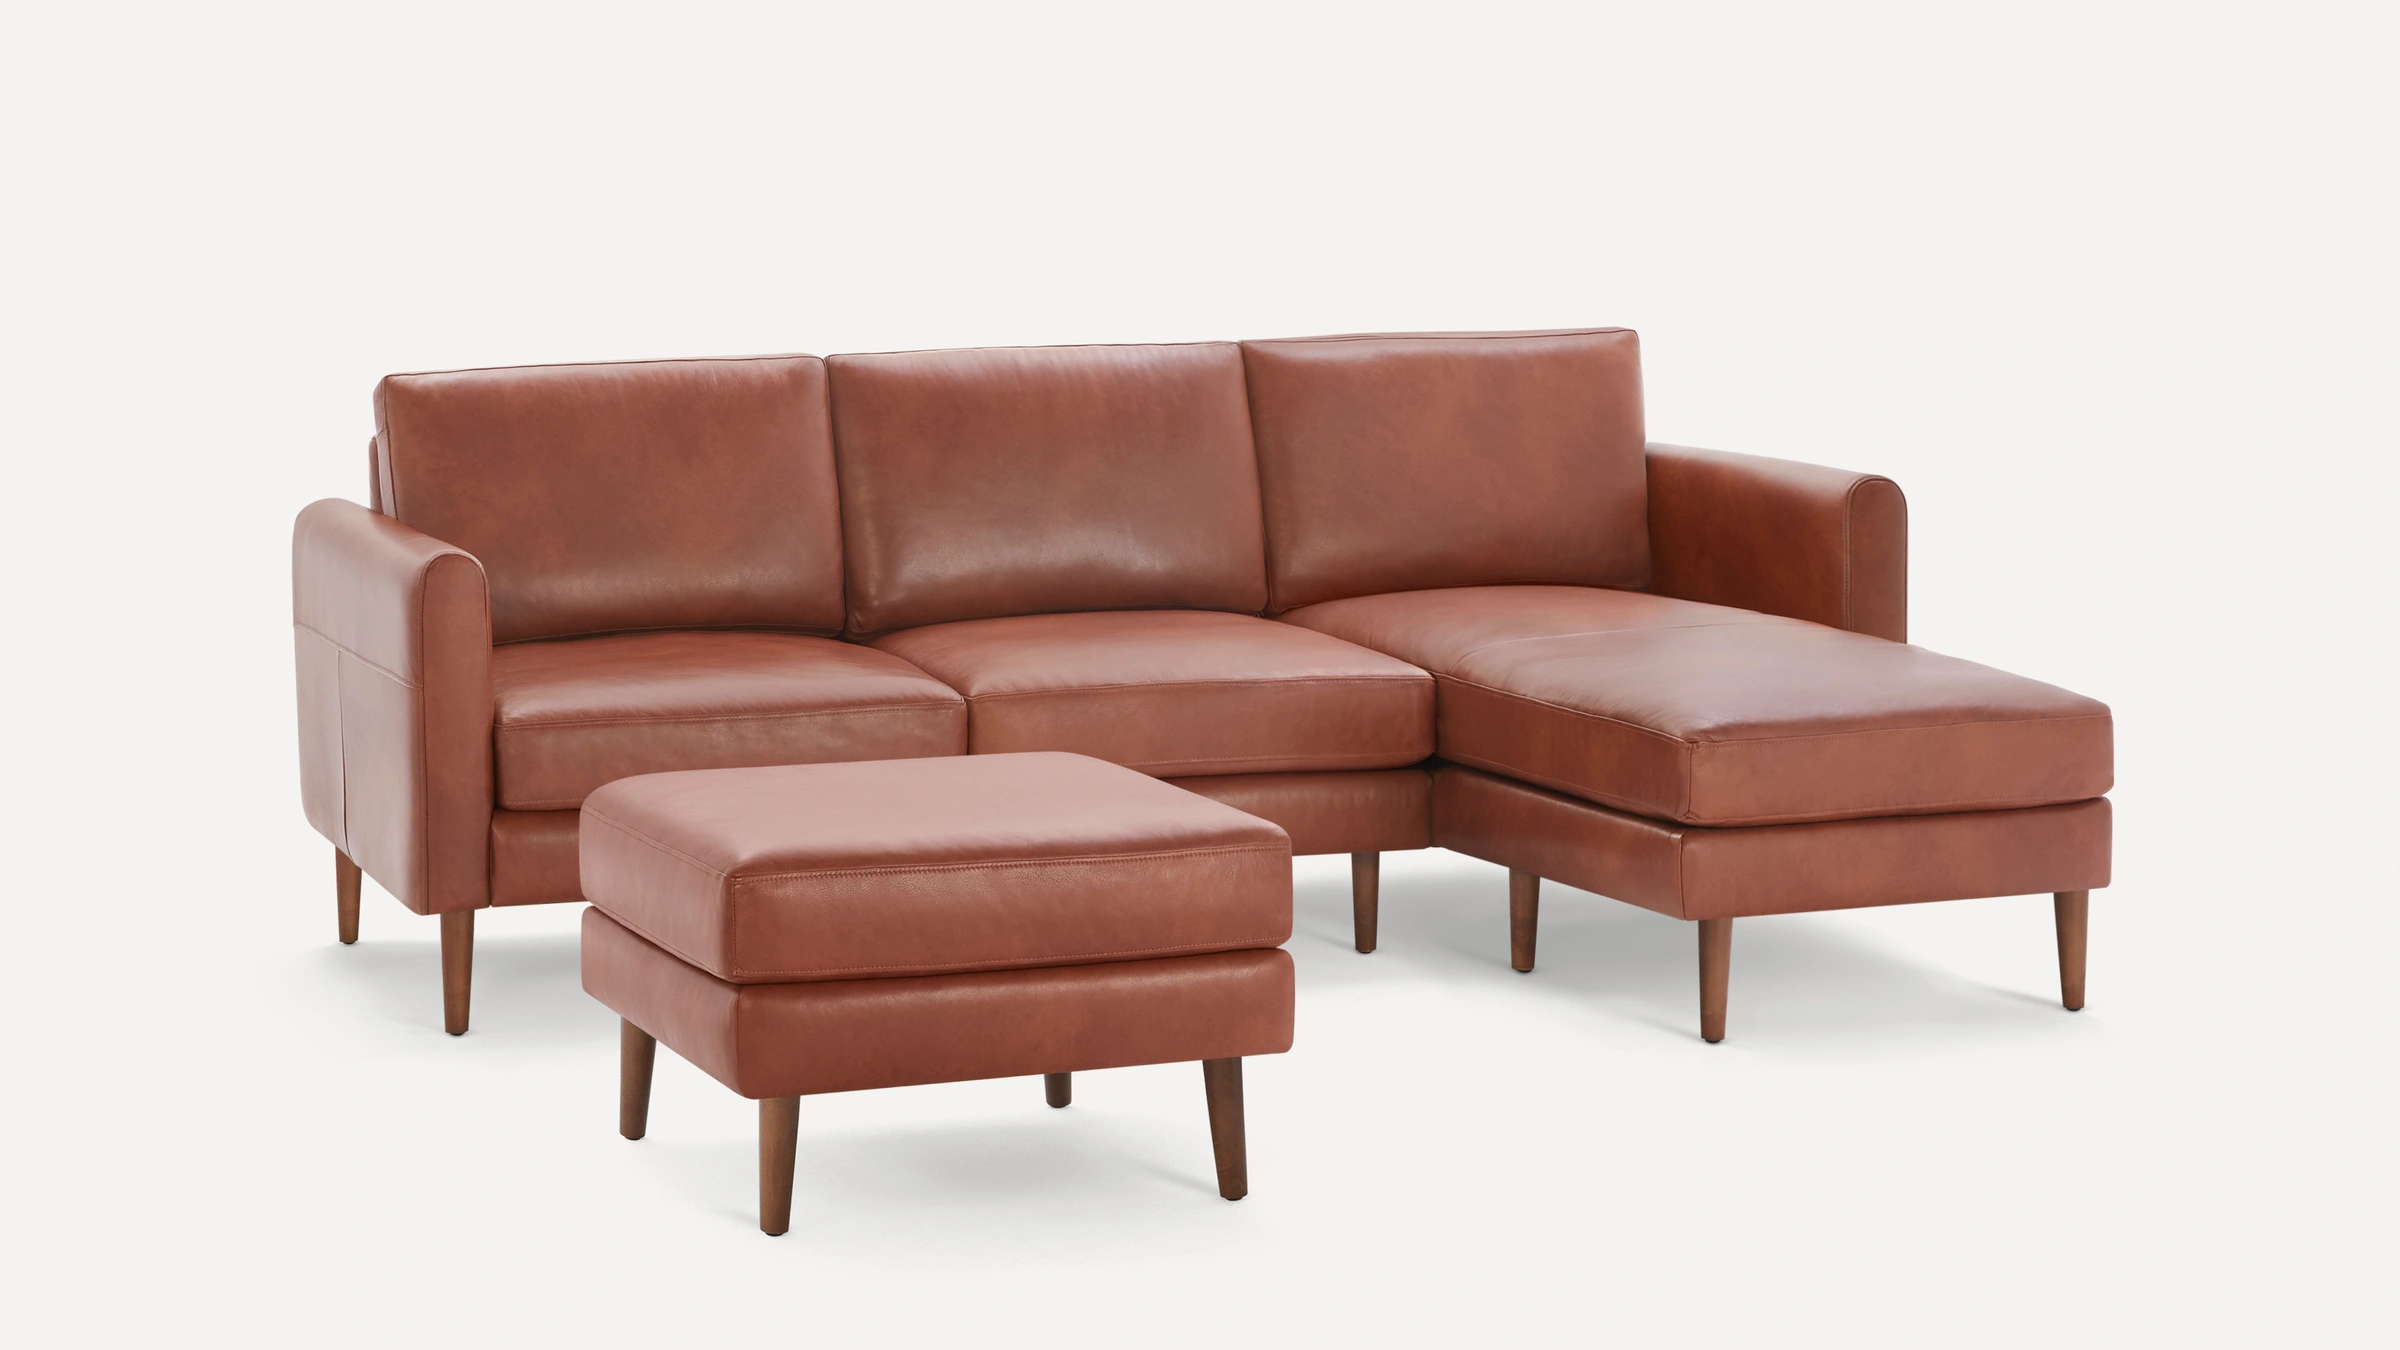 The Nomad Leather Sectional With, Leather Sectional Ottoman